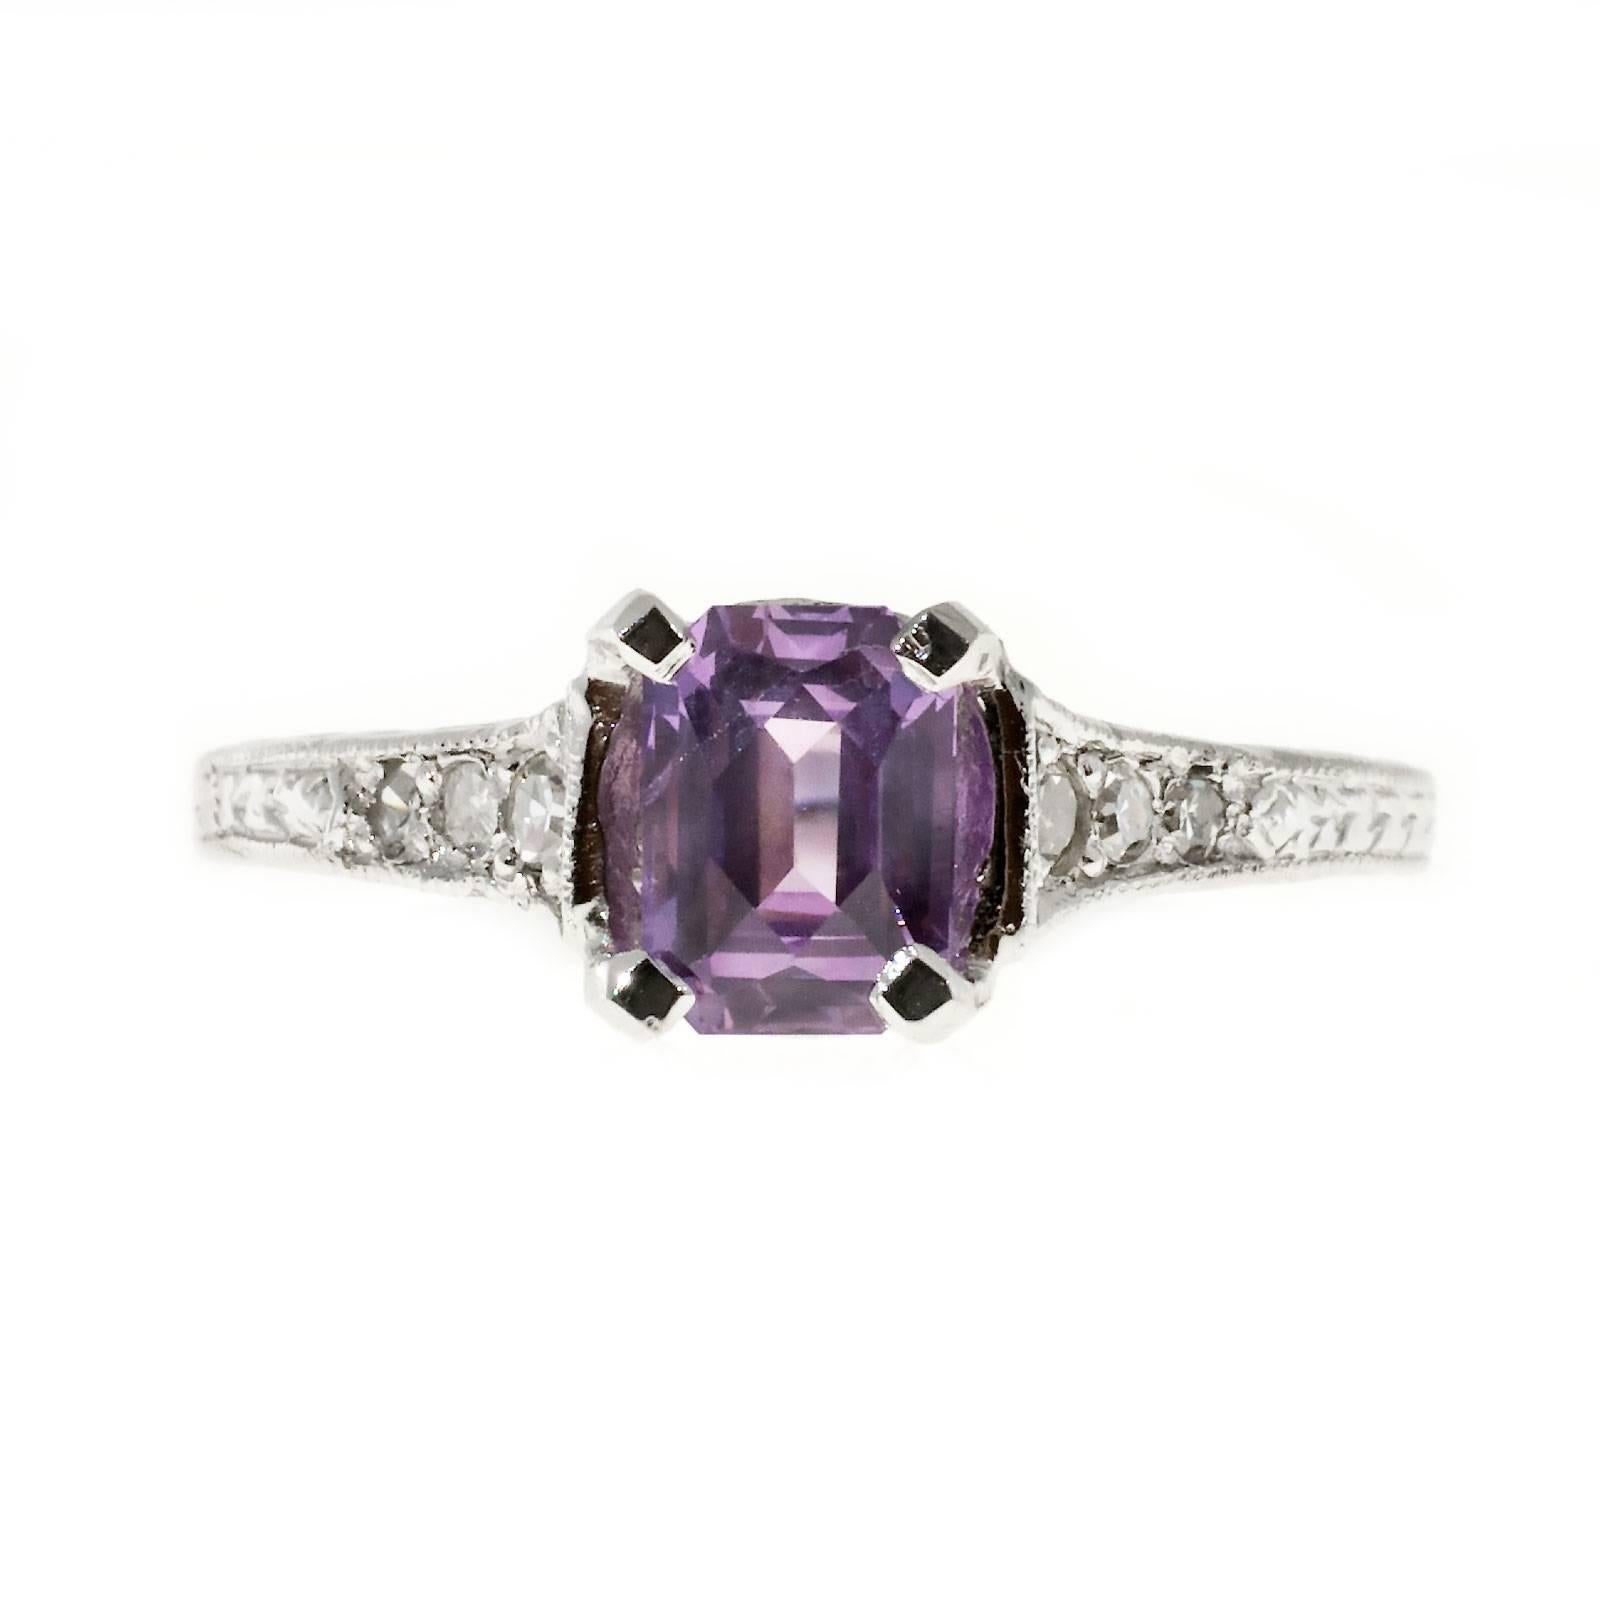 Original Art Deco 1920 Platinum engagement ring with a rare natural certified Emerald step cut sapphire with a rare pinkish purple color. Bright clear crisp color.

1 octagonal pinkish purple modified step cut Sapphire, approx. total weight 1.07cts,